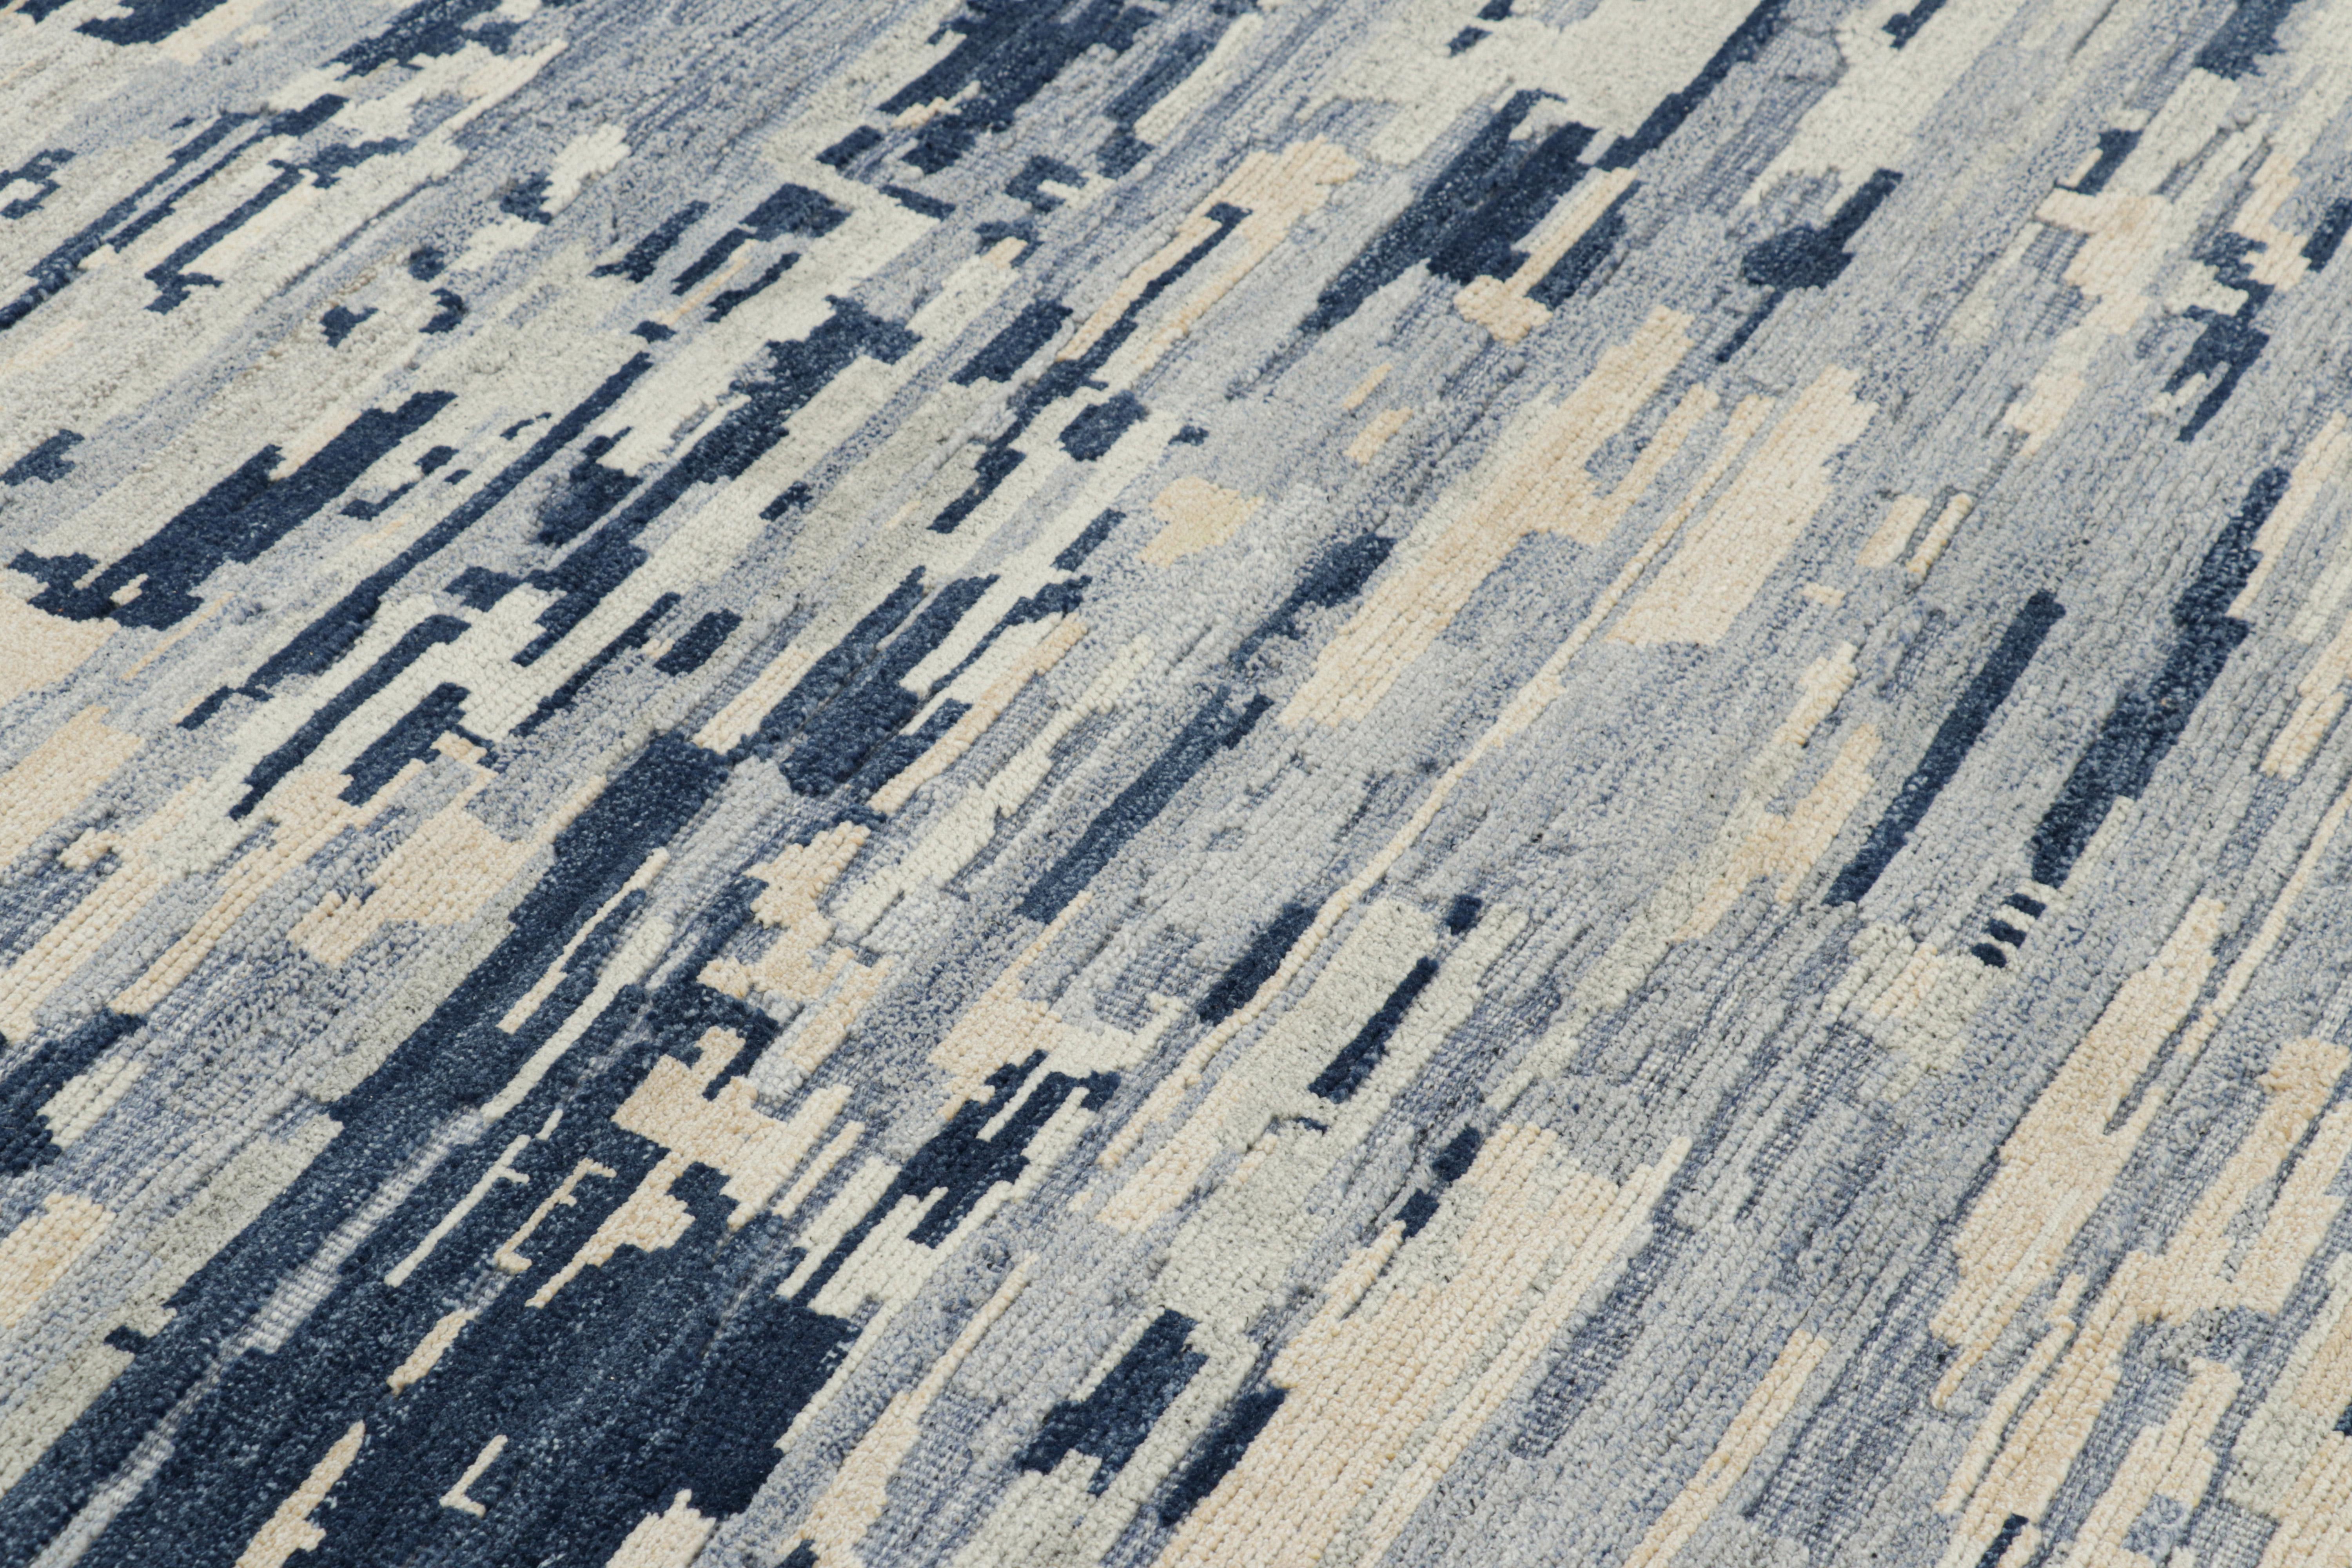 Hand-knotted in wool, this 5x6 modern abstract rug features blue and cream white tones underscore geometric patterns like that of painterly brushstrokes, married to a high-low texture. 

On the Design: 

Connoisseurs may admire this piece with